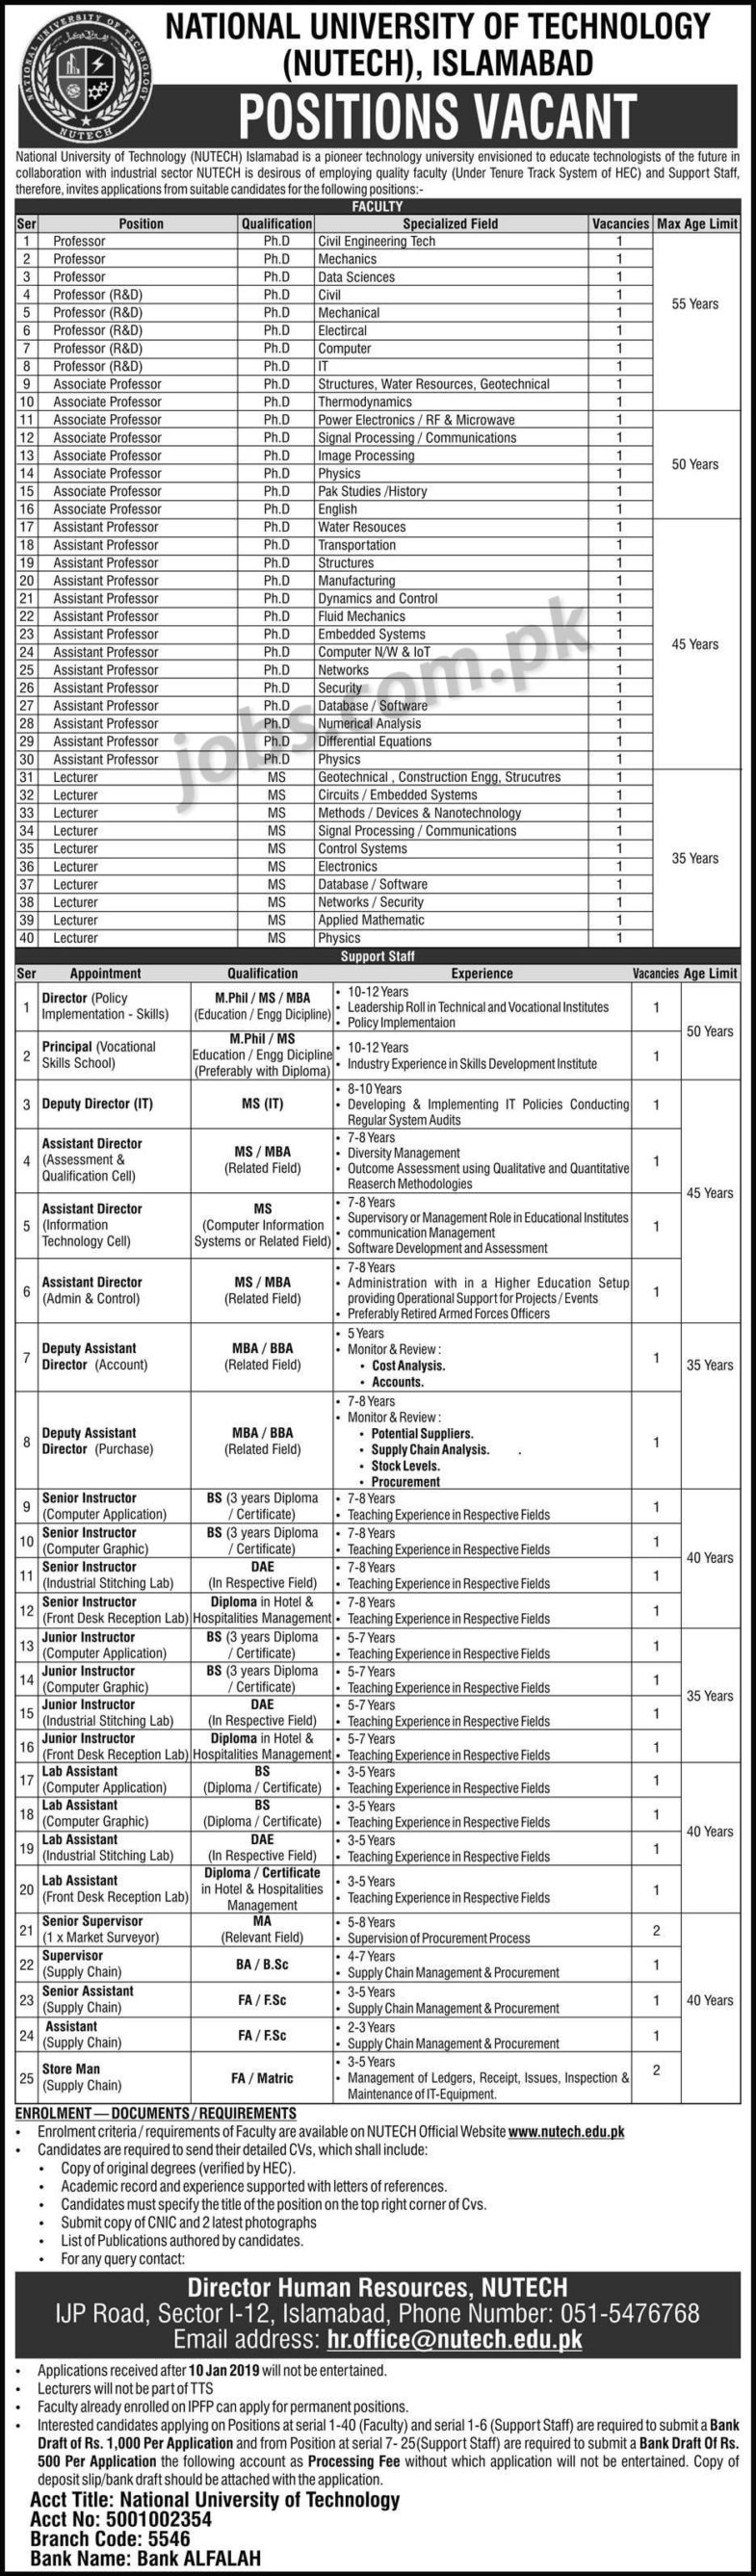 National University of Technology (NUTECH) Islamabad Jobs 2019 for 67+ Teaching & Non-Teaching Vacancies (Multiple Categories) to be filled immediately. Required qualification from a recognized institution and relevant work experience requirement are as following. Eligible candidates are encouraged to apply to the post in prescribed manner. Incomplete and late submissions/applications will not be entertained. Only short listed candidates will be invited for interview and the selection process. No TA/DA will be admissible for Test/Interview. Last date to apply to the post and submit application along with required documents is 10th January 2019.